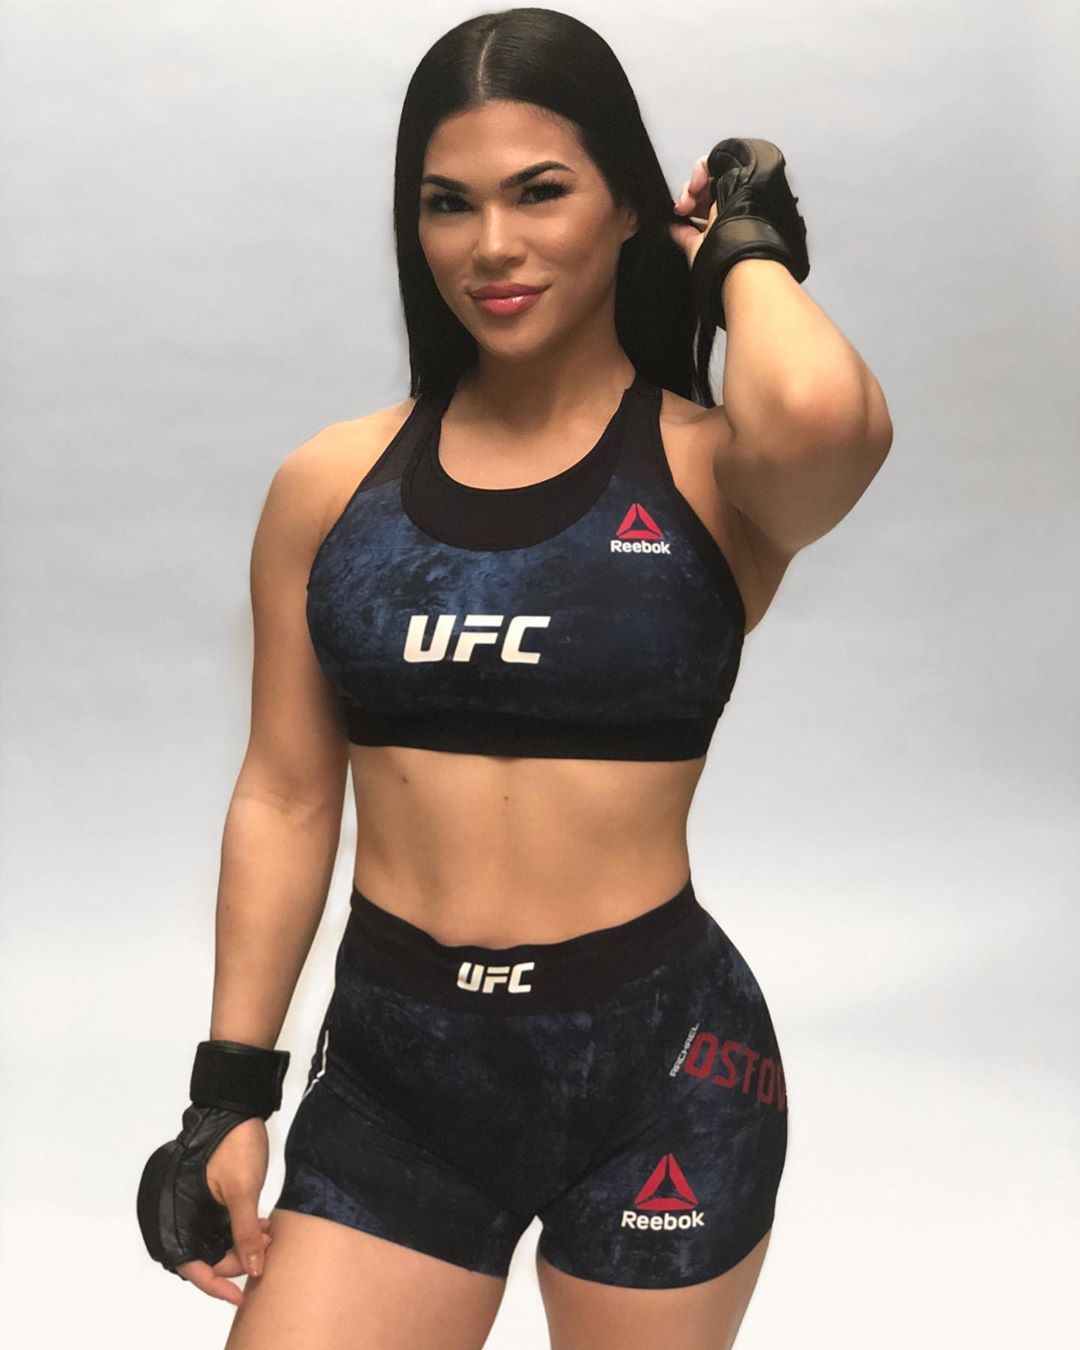 Rachael Ostovich Busting Out of Her Top! - Photo 5